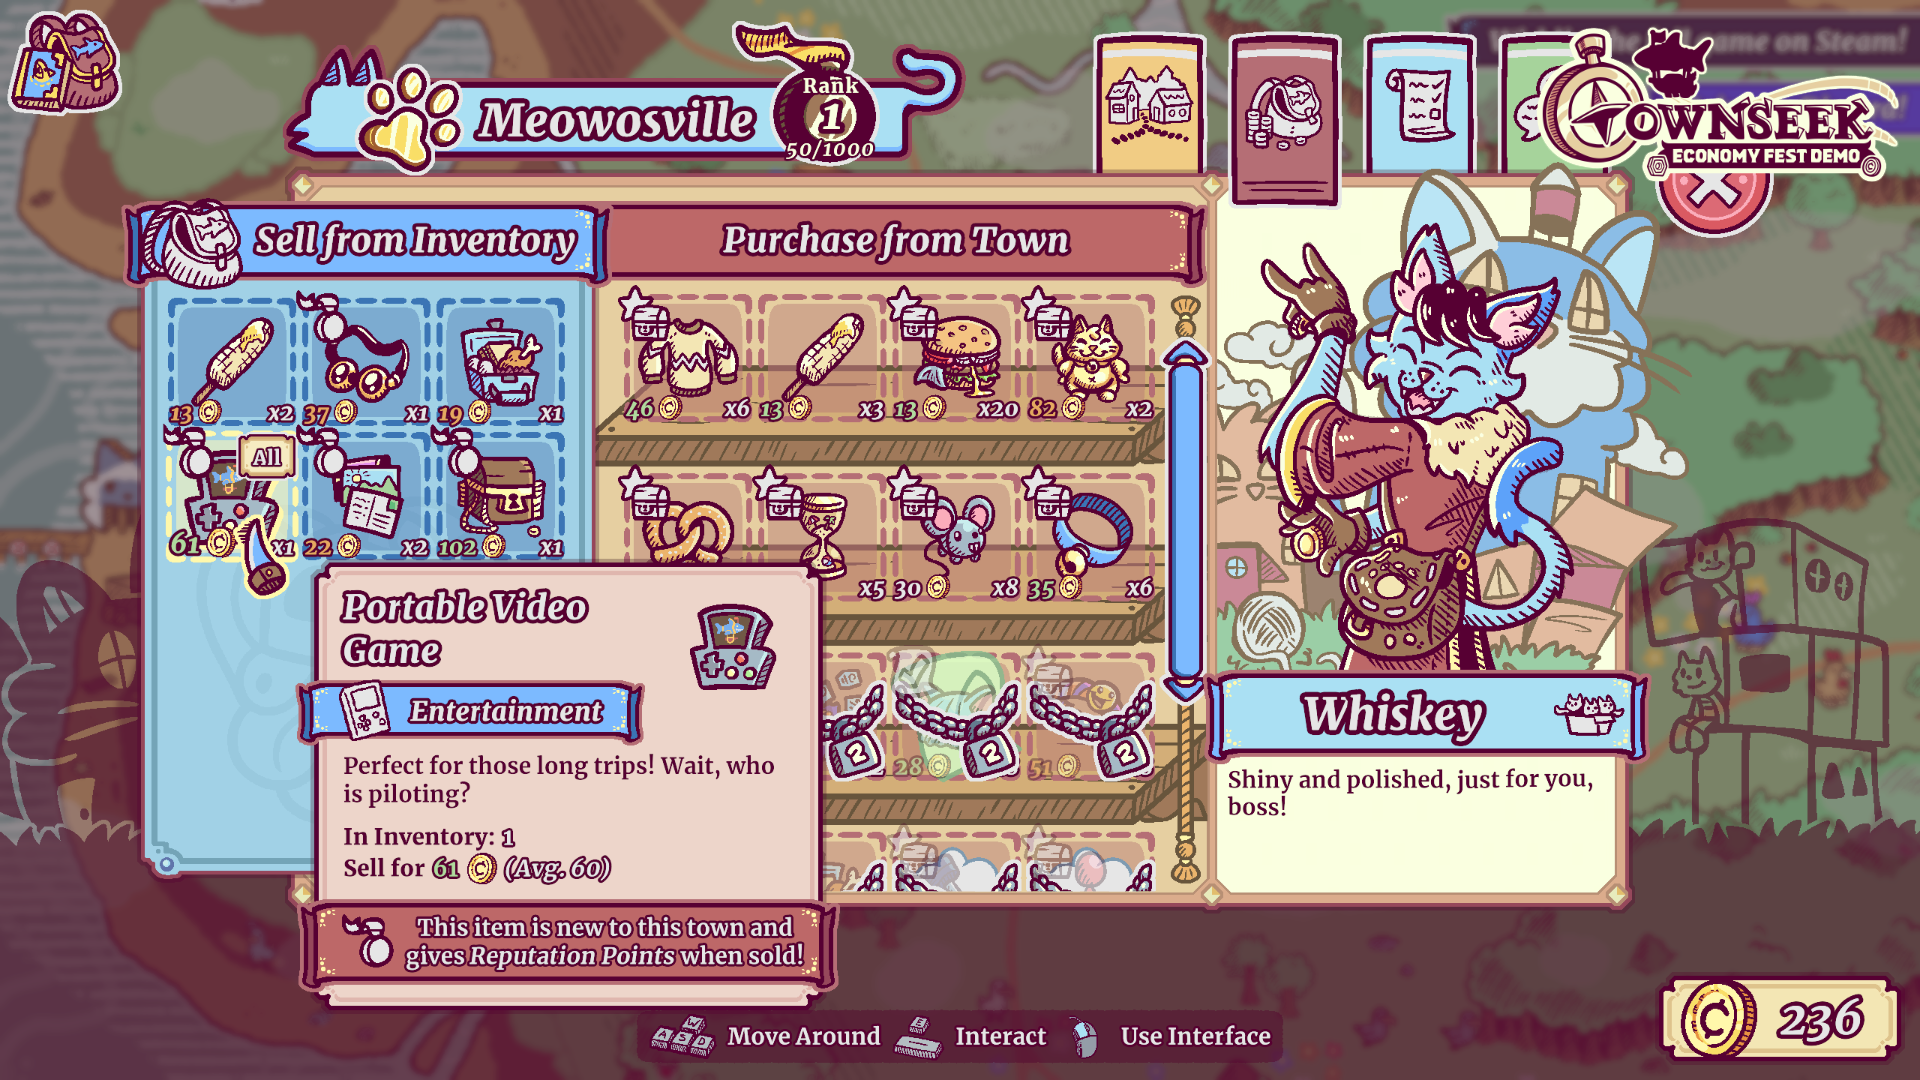 Screenshot of Townseek from the Steam Capitalism and Economy Fest